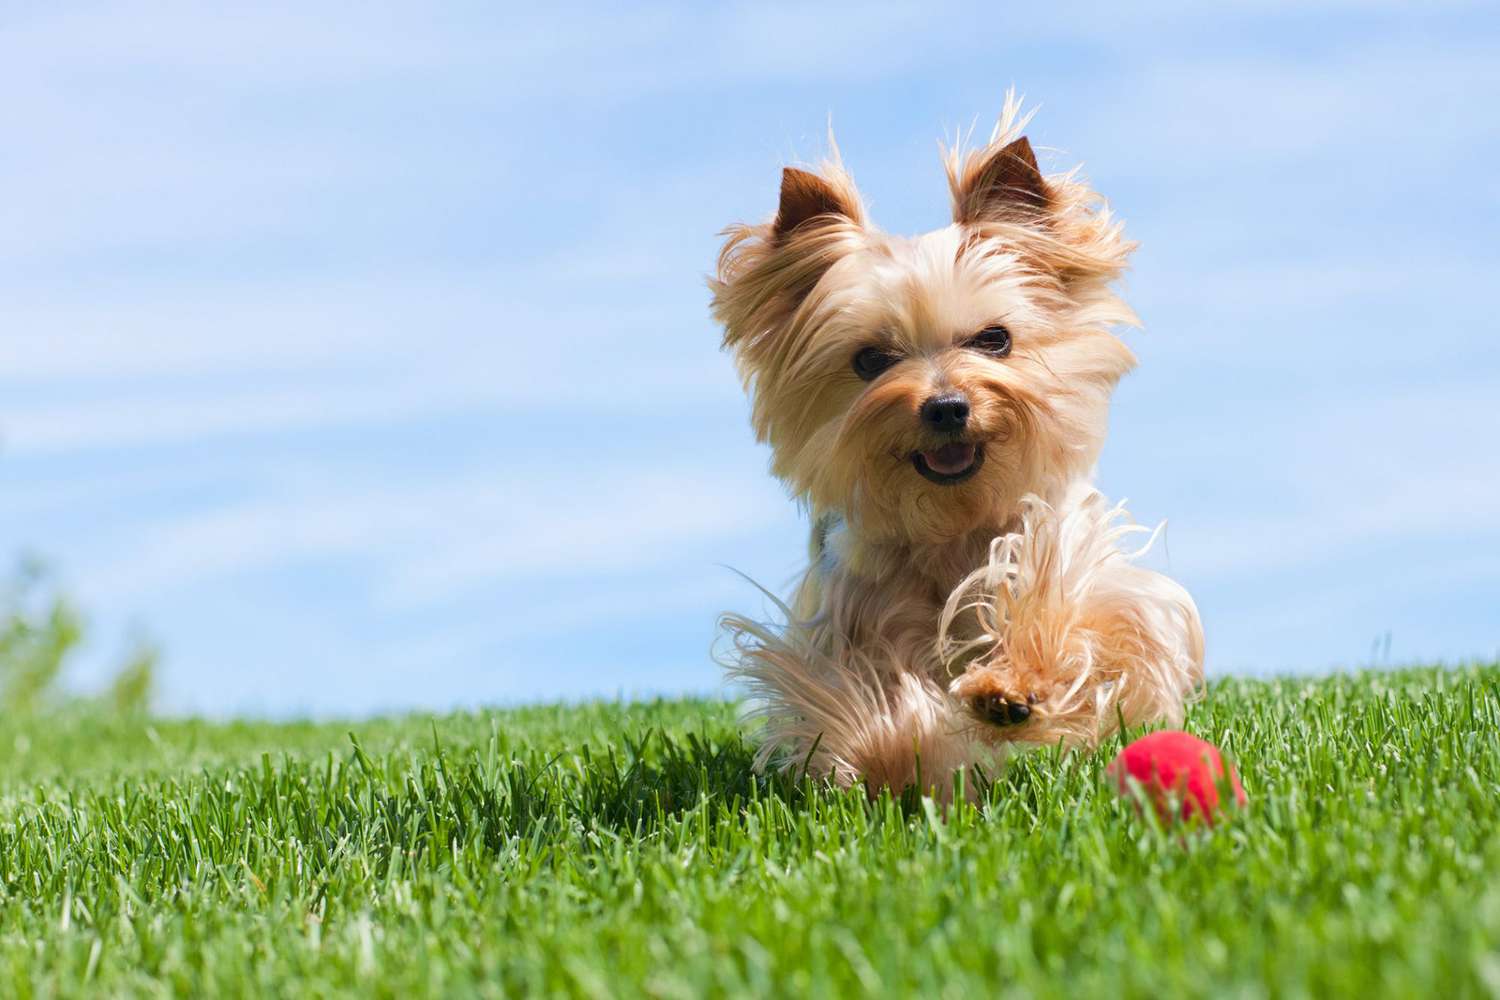 light-color yorkshire terrier or yorkie running in grass